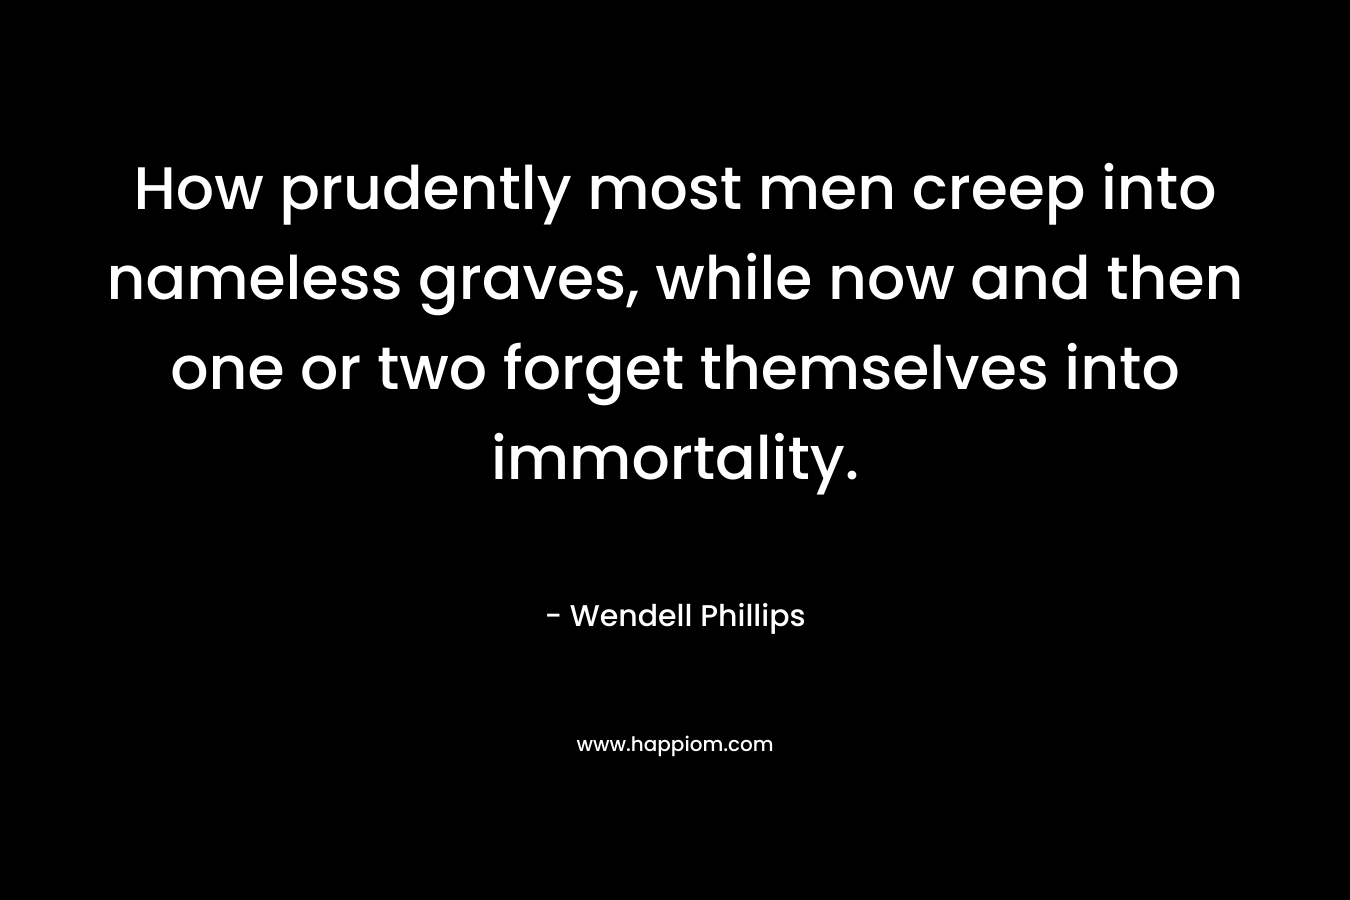 How prudently most men creep into nameless graves, while now and then one or two forget themselves into immortality. – Wendell Phillips